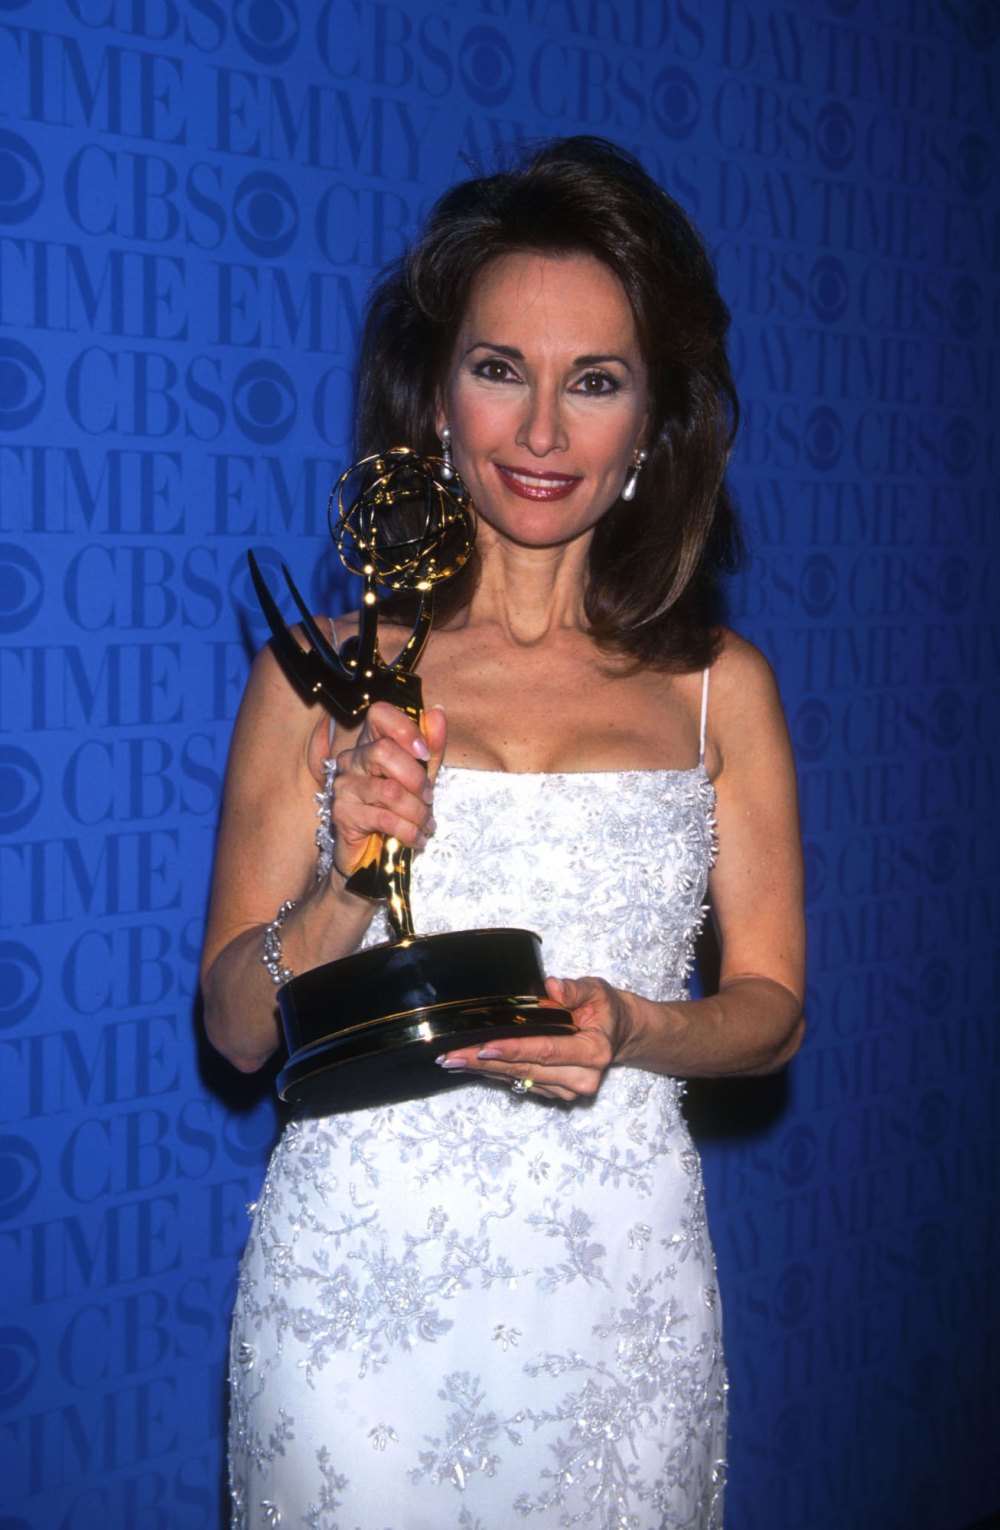 Susan Lucci will receive the 2023 Daytime Emmys Lifetime Achievement Award